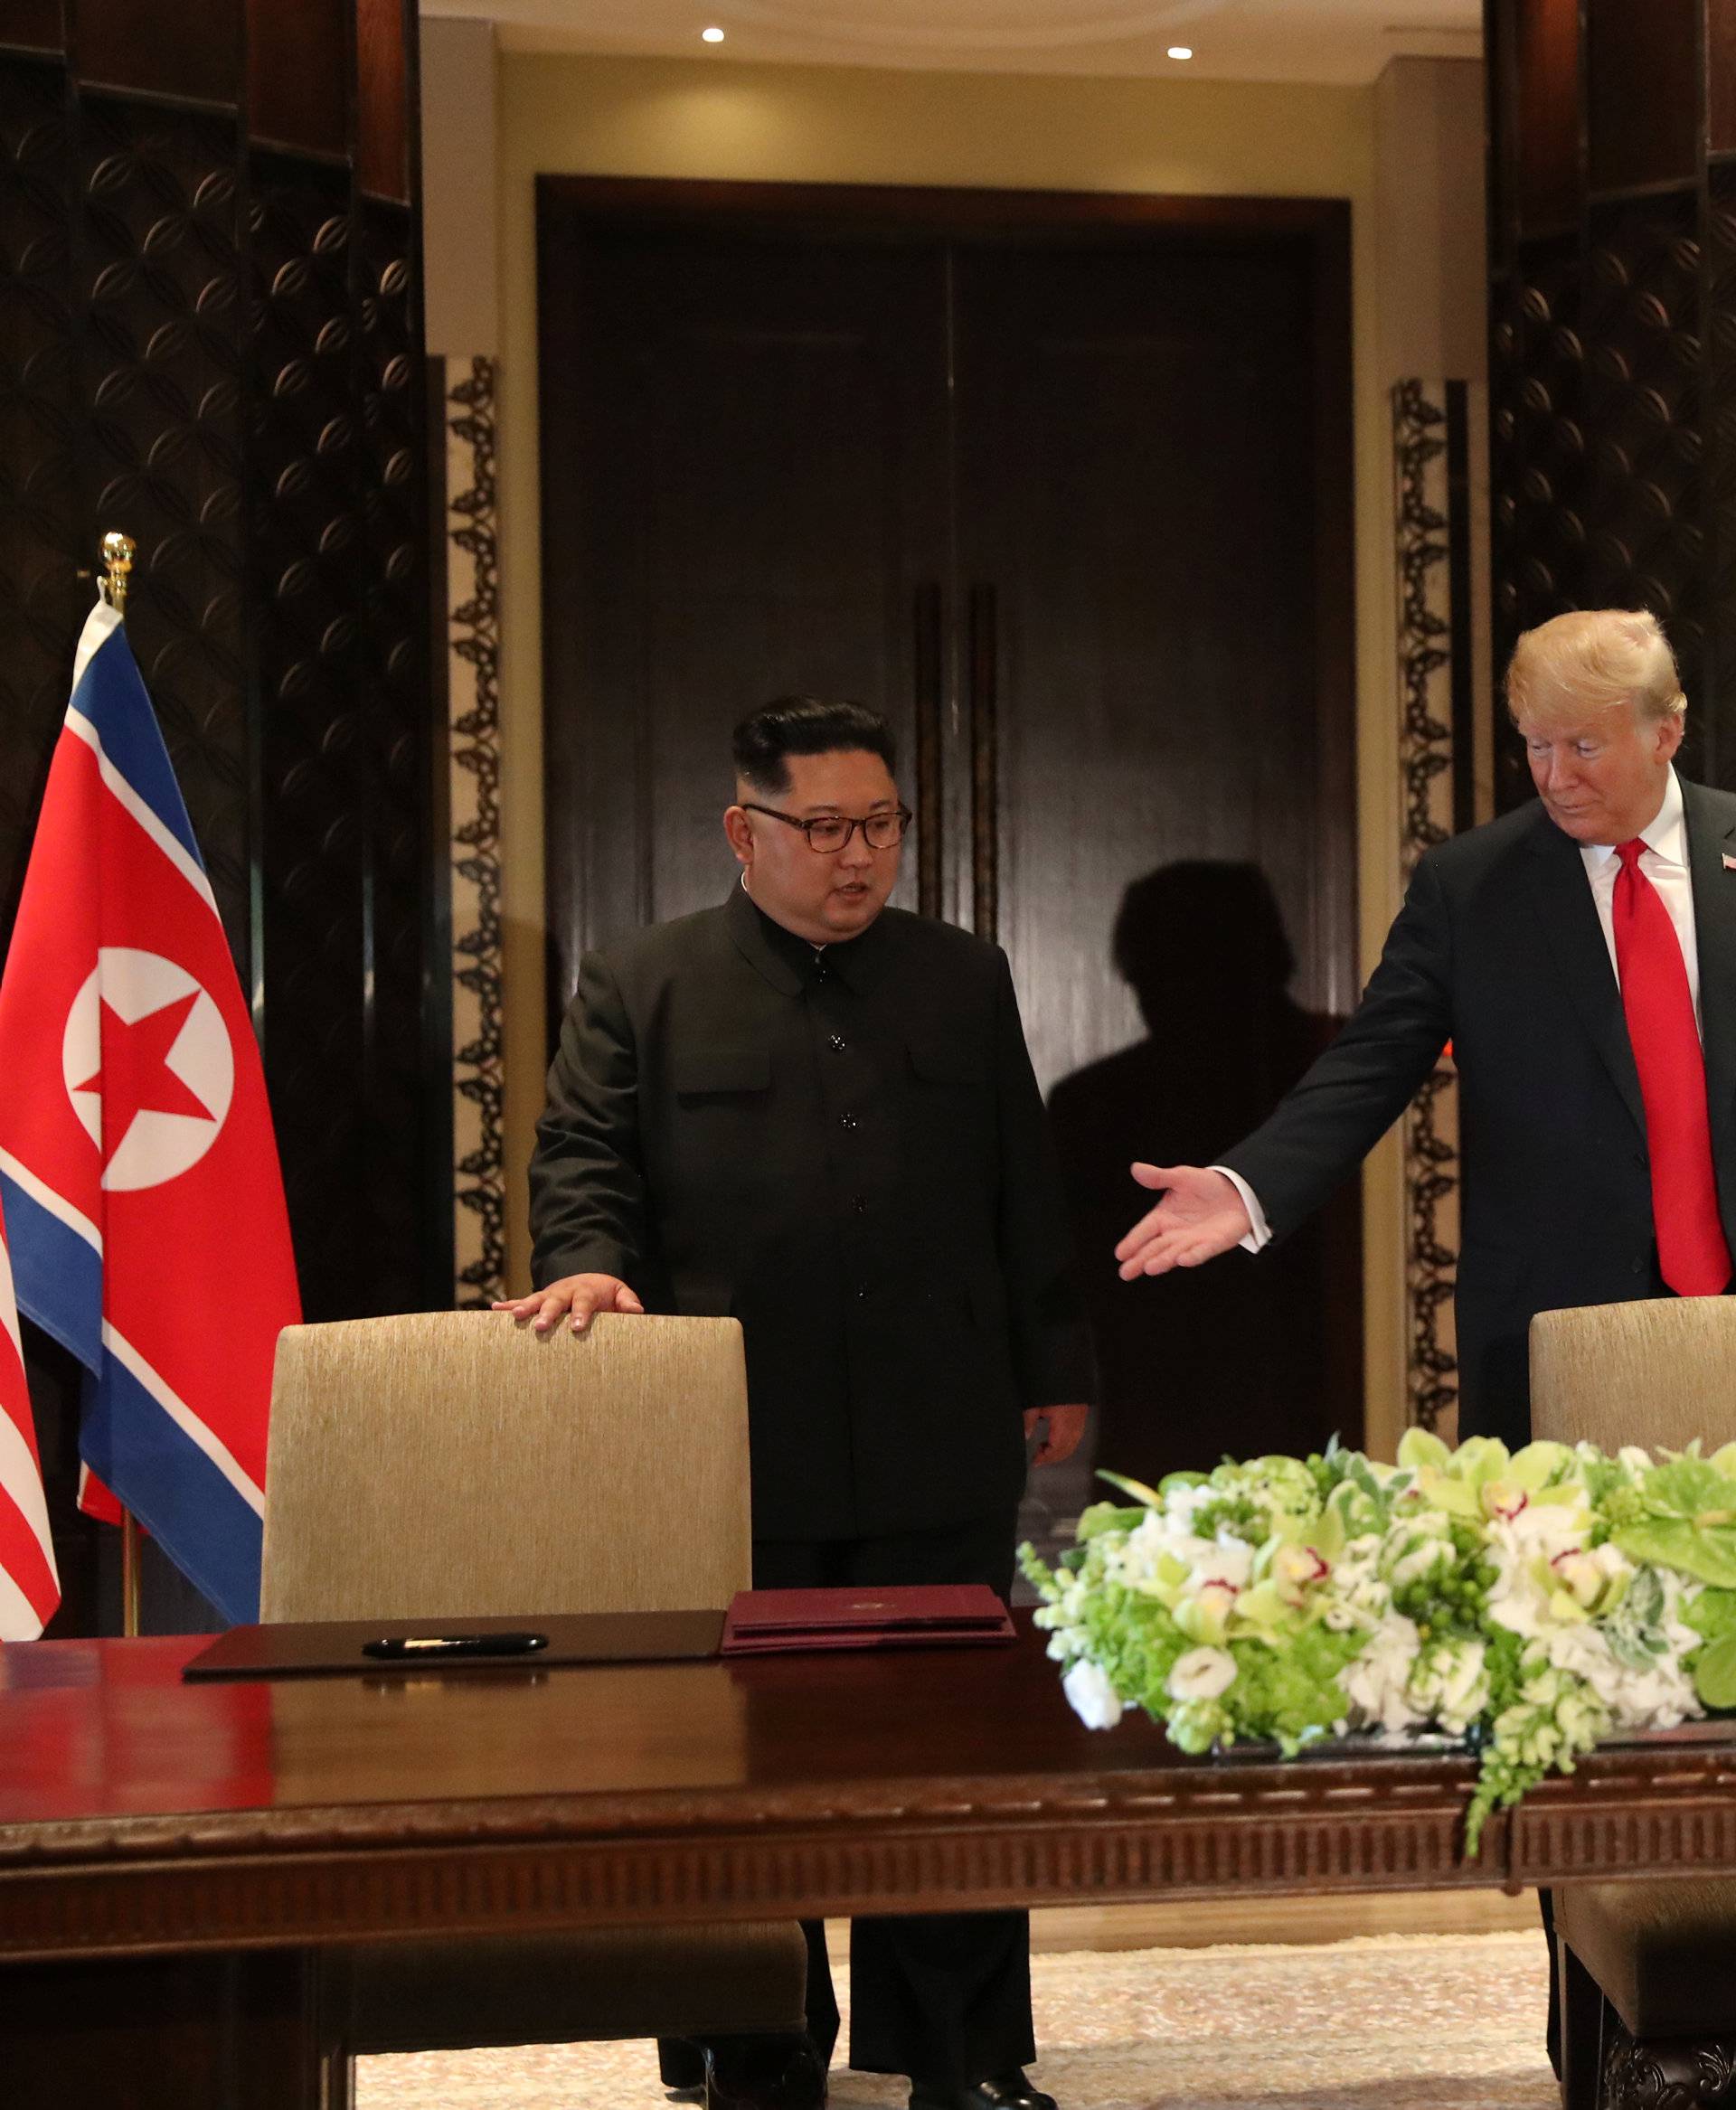 U.S. President Donald Trump and North Korea's leader Kim Jong Un arrive to sign a document, after their summit in Singapore